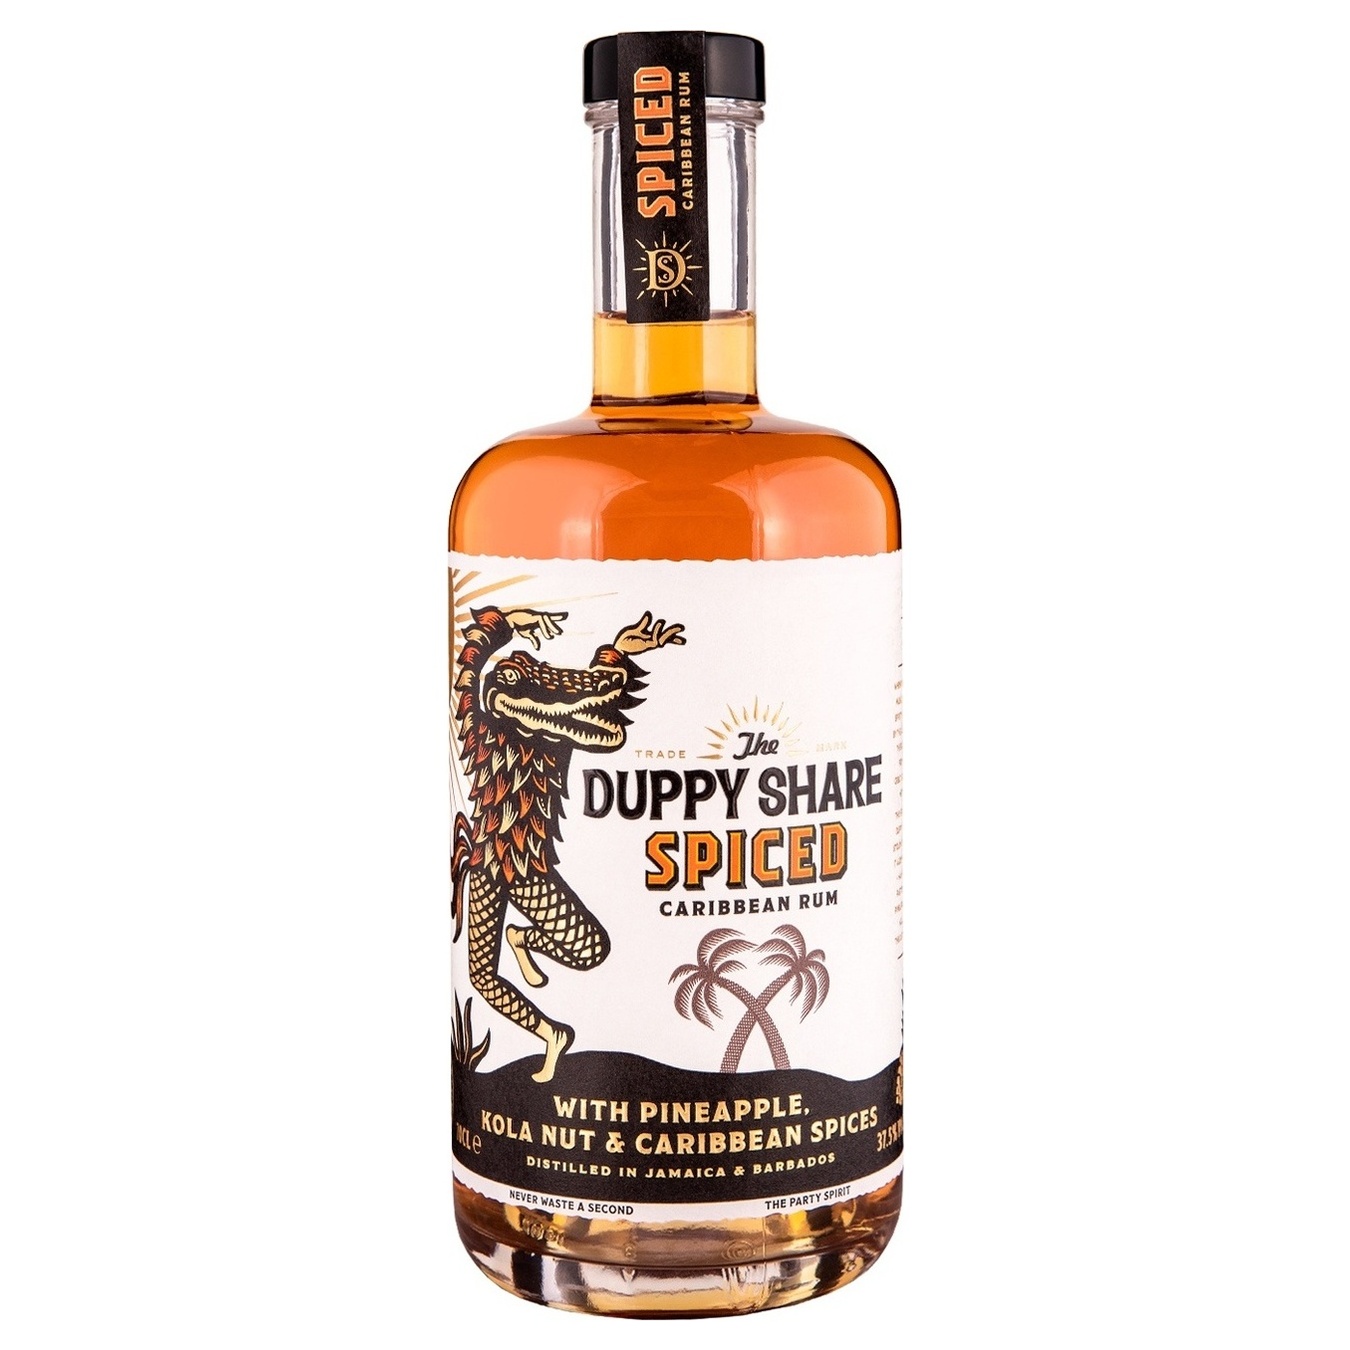 Rum Duppy Share Spiced 37.5% 0.7l